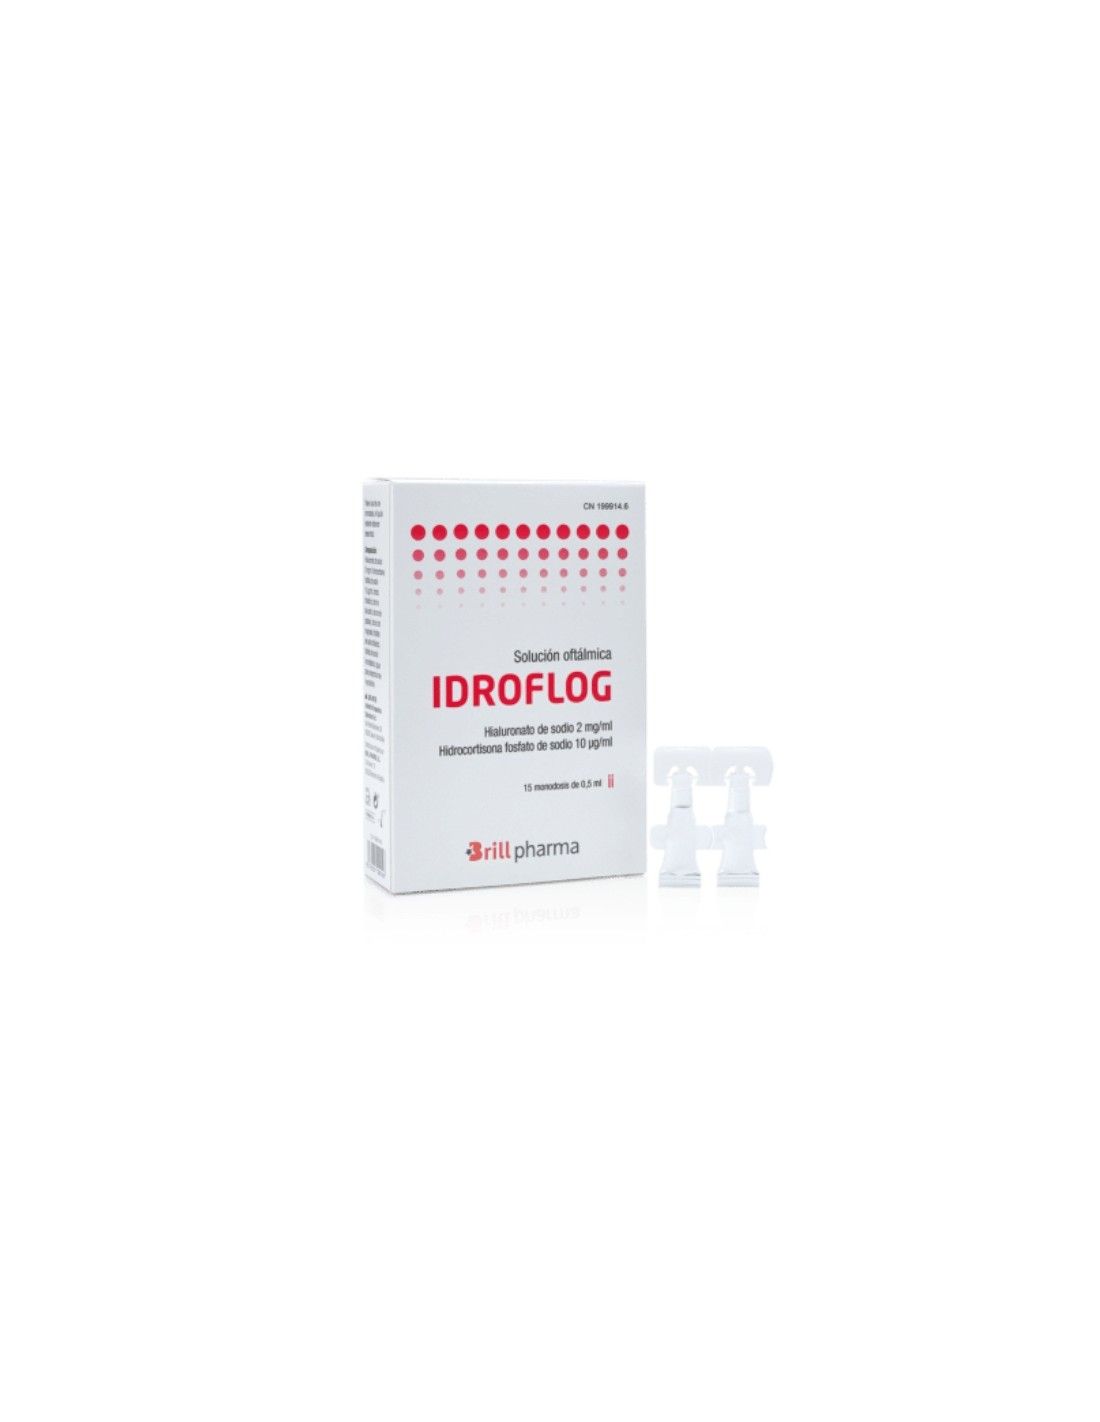 AQUORAL Forte Ophthalmic Drops 30 Single-Dose【ONLINE OFFER】